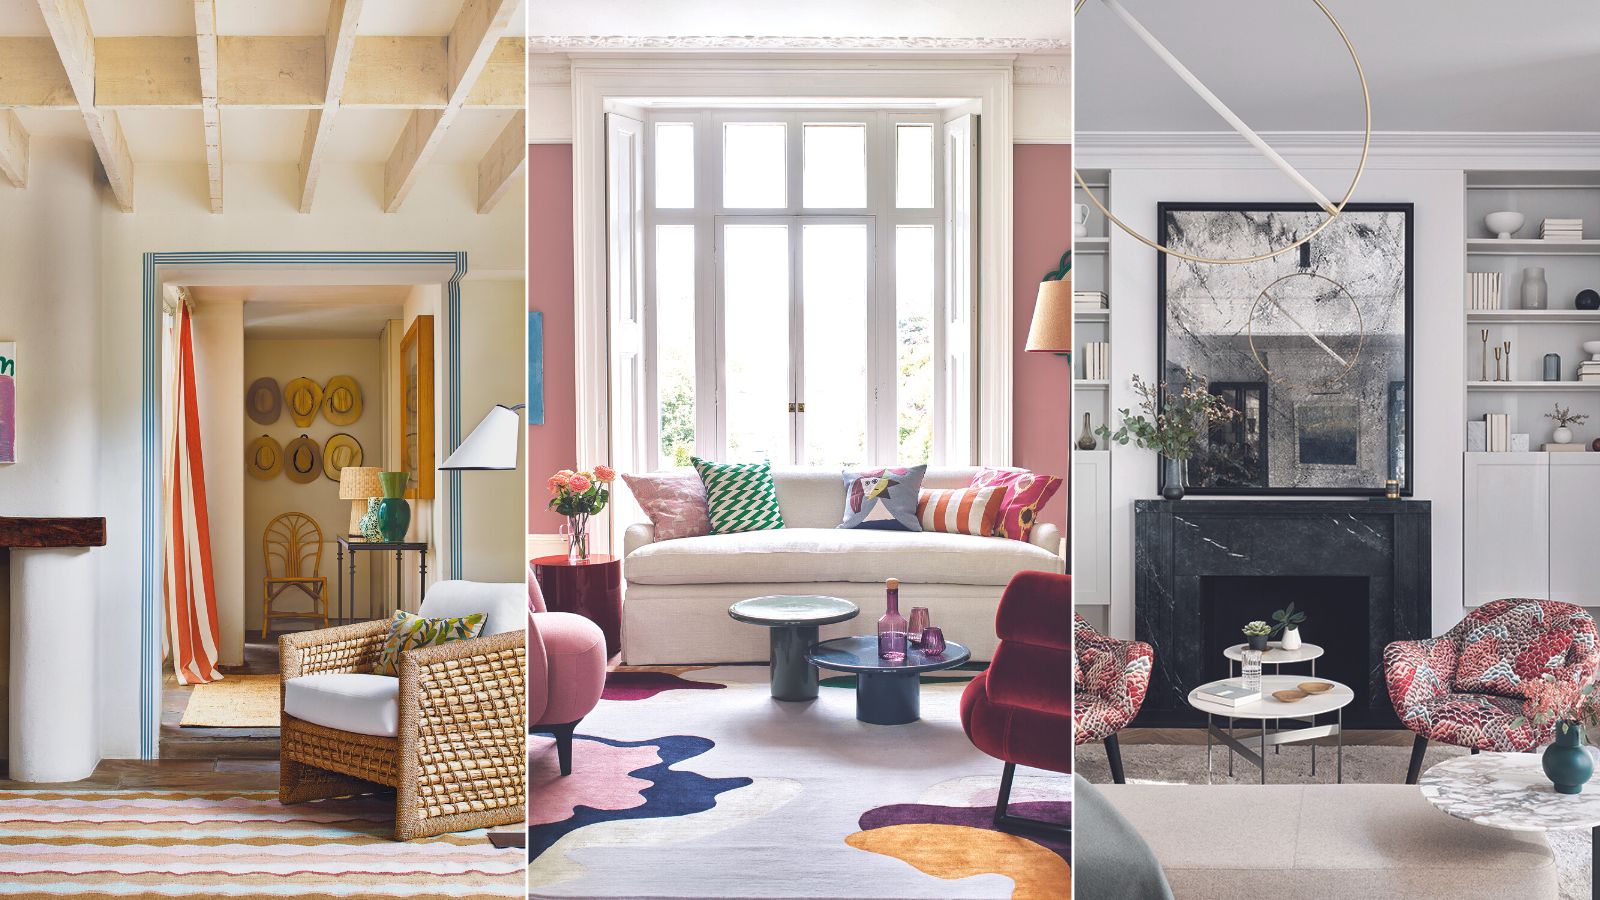 living room makeover ideas on a budget: 10 luxury looks for less |